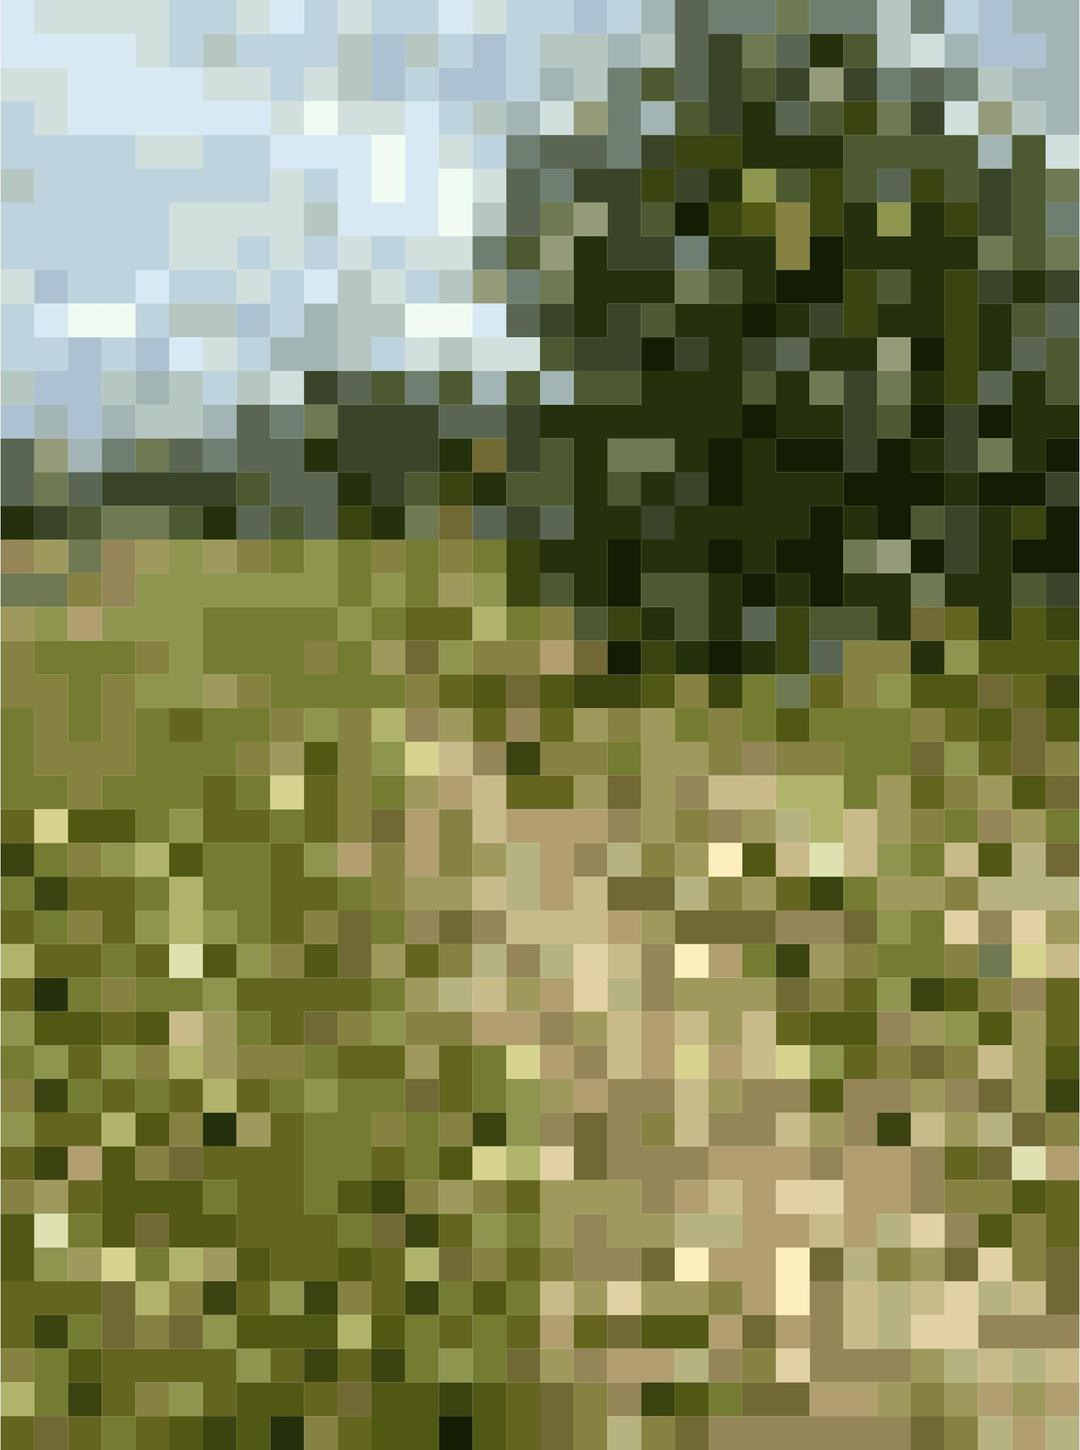 Pixellized Country Scene png transparent